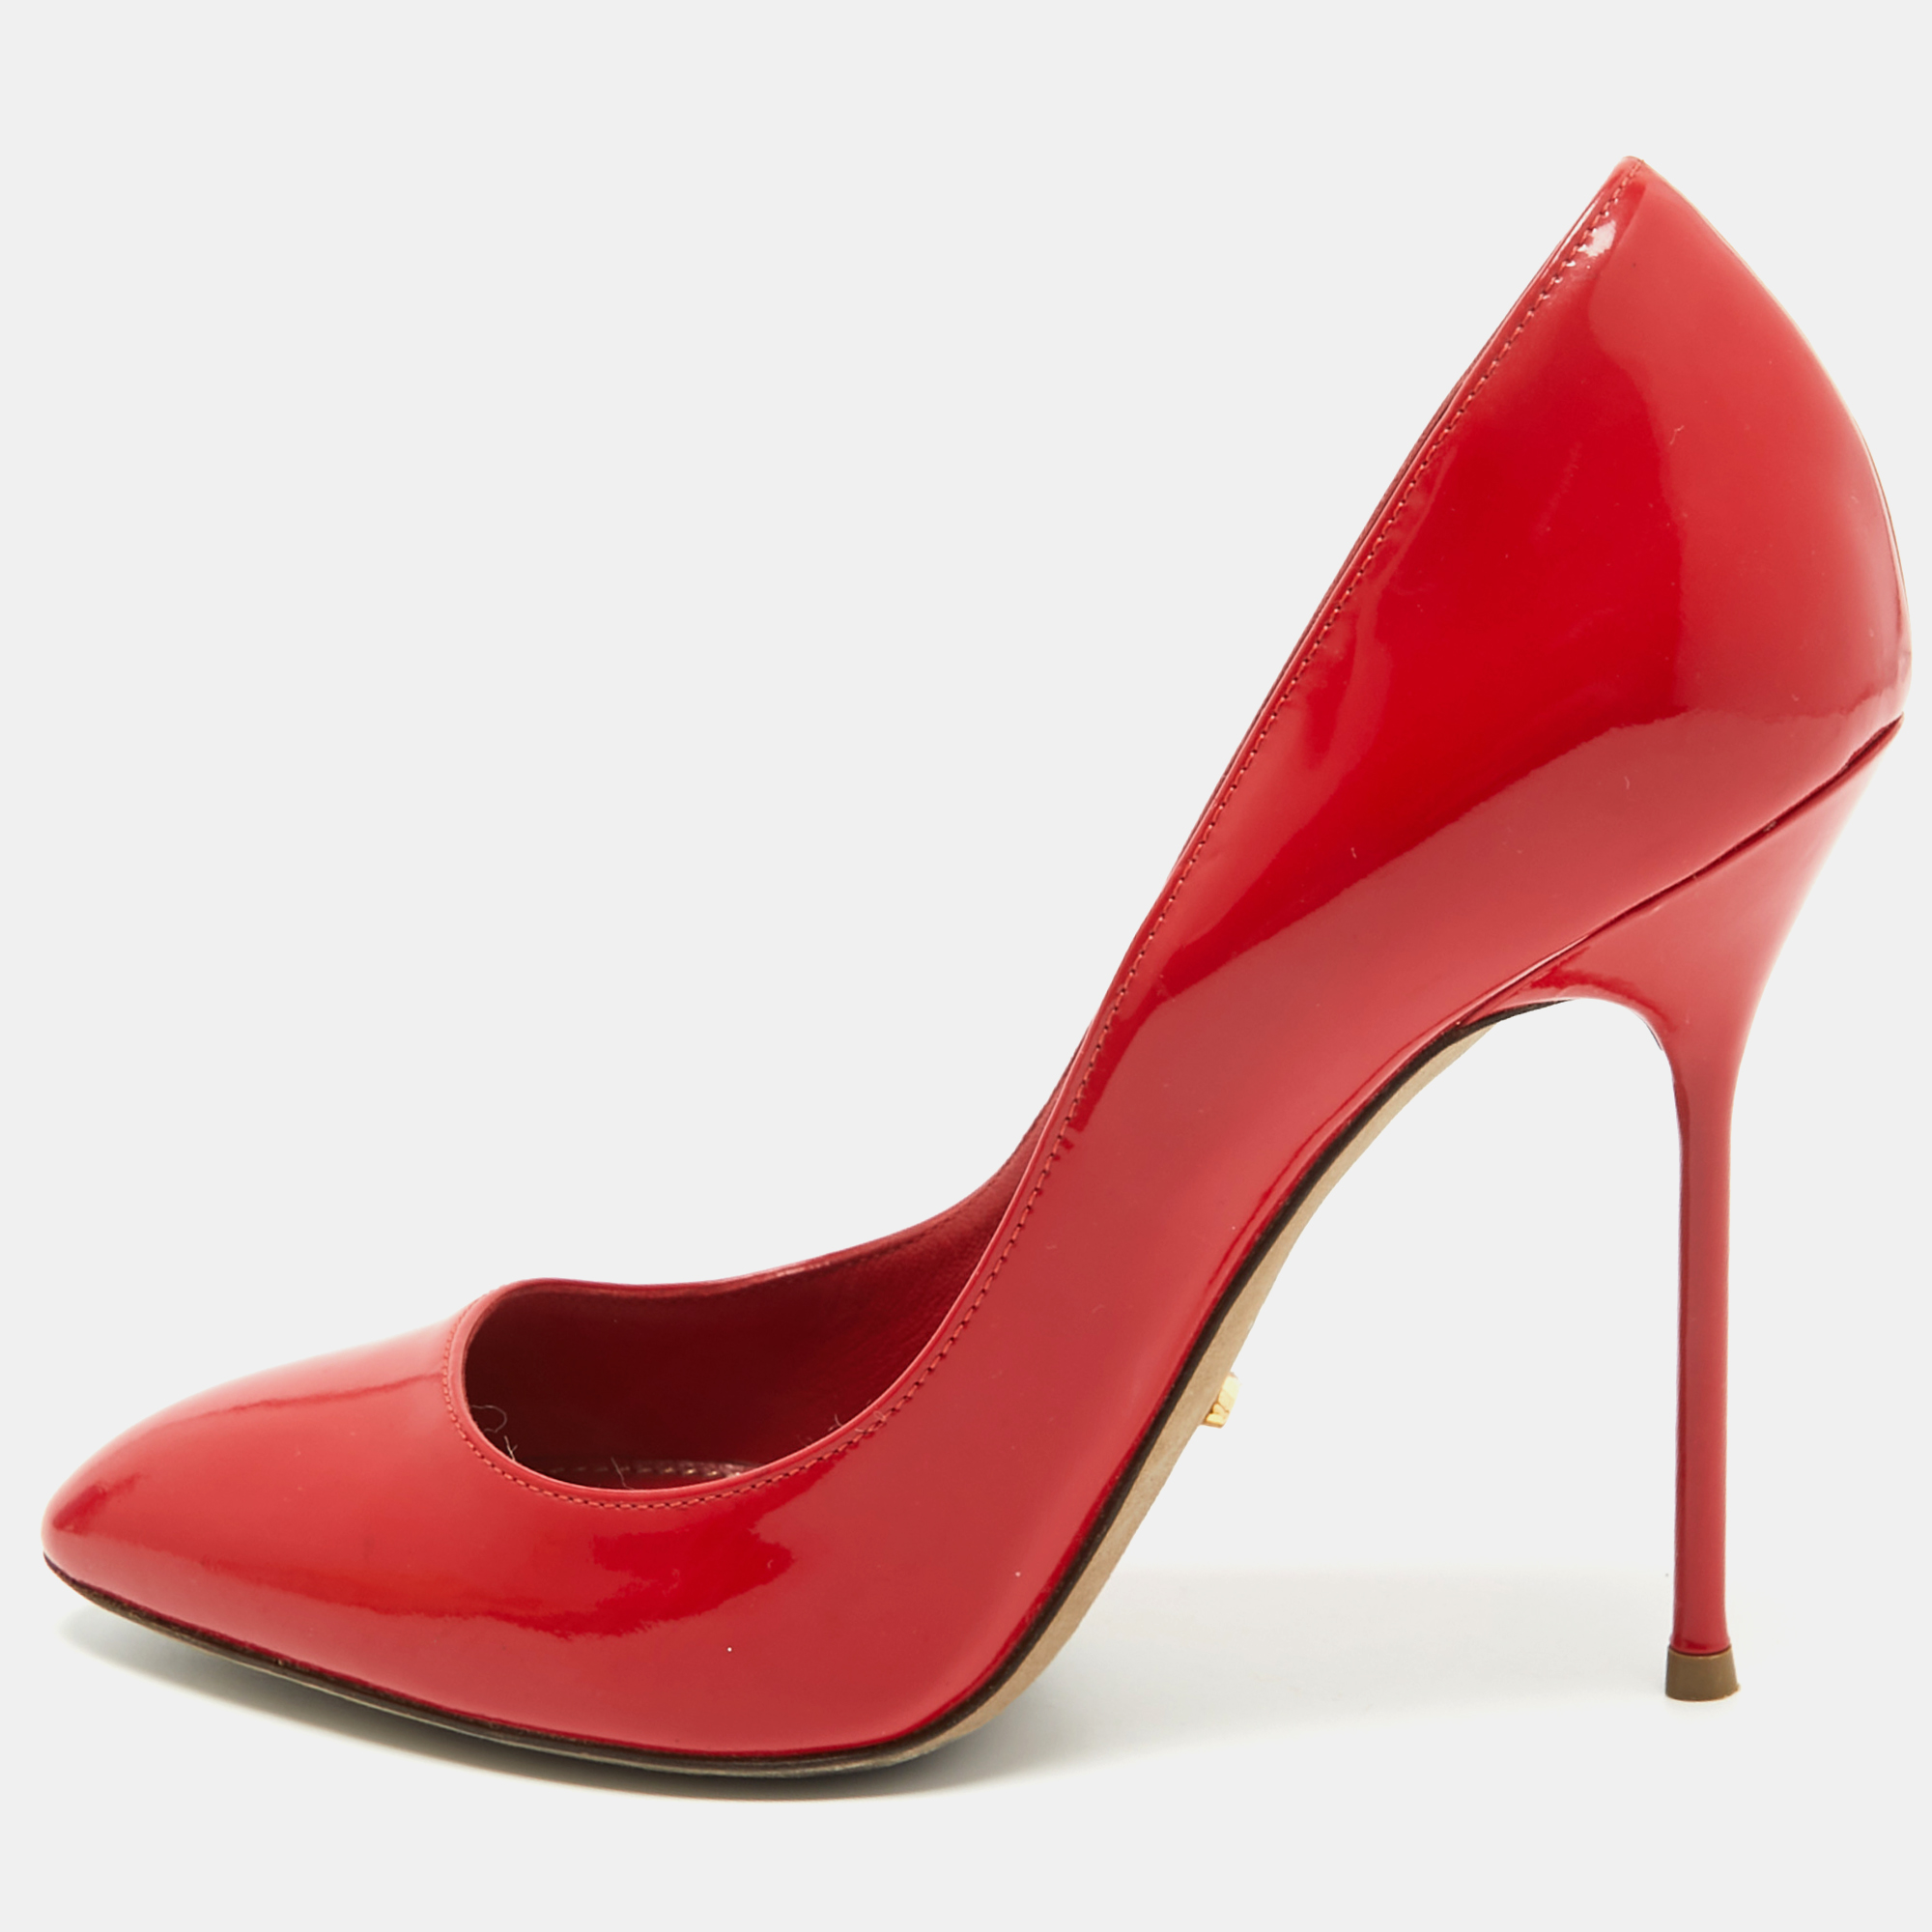 Sergio rossi red patent leather pumps size 38